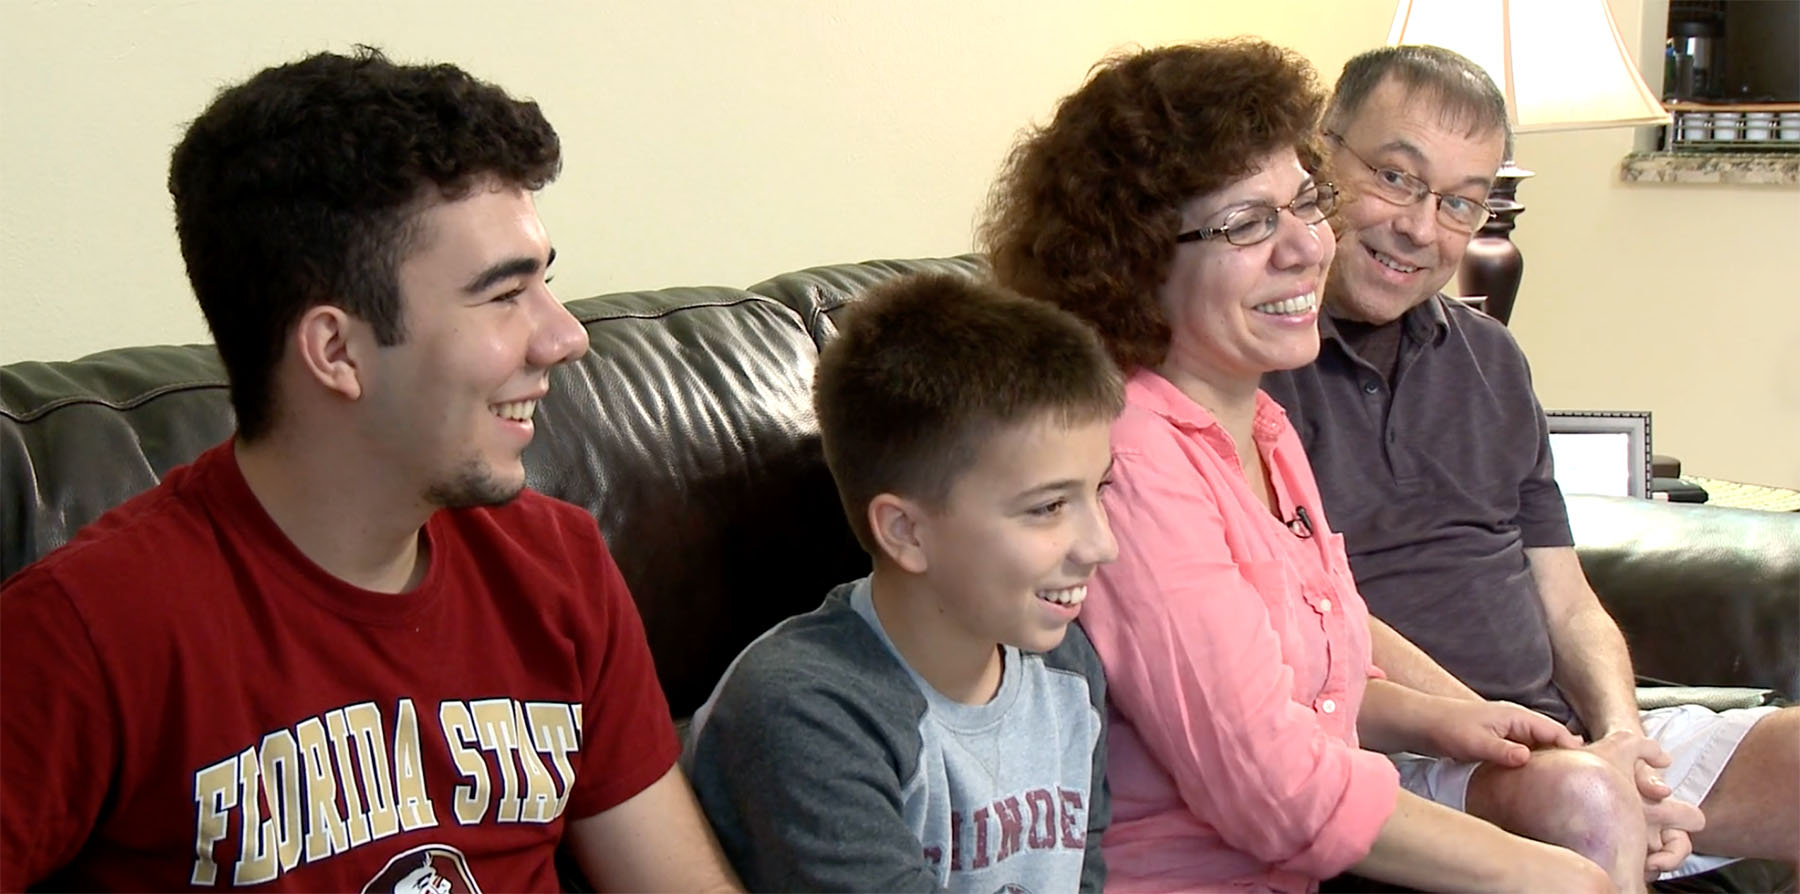 Family of 4 happily sits on couch. Dad is sarcoma survivor